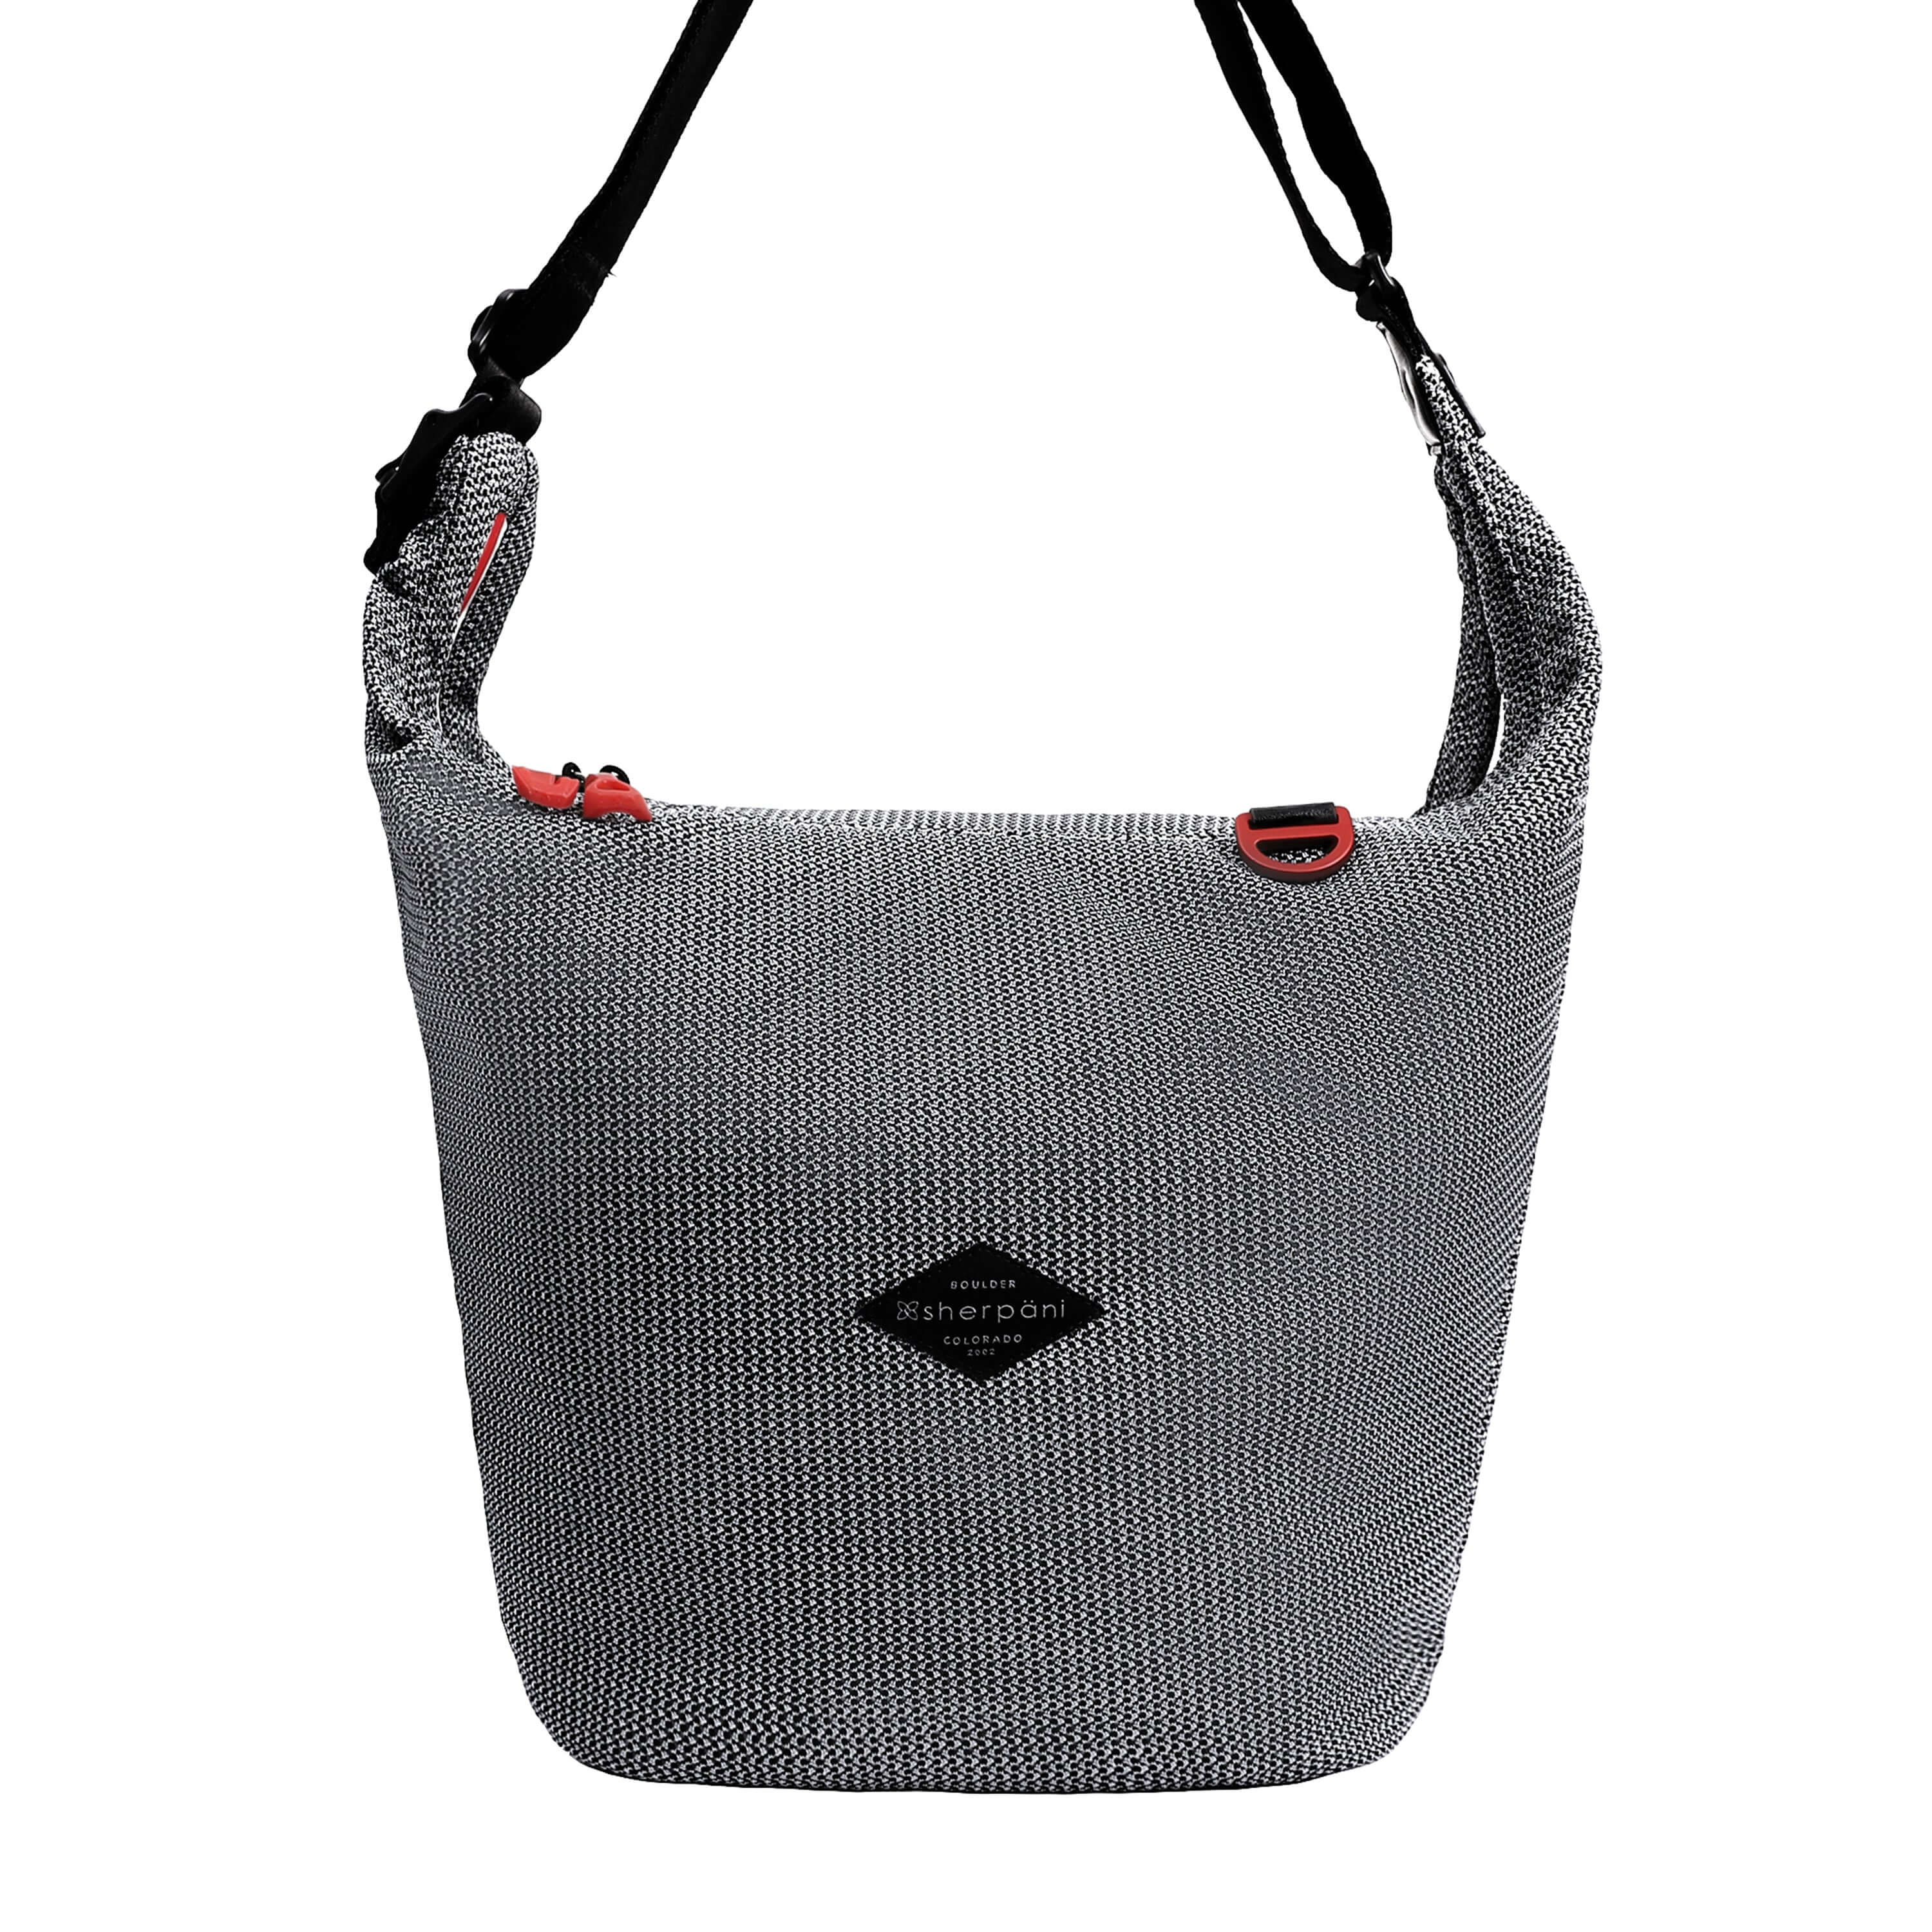 Flat front view of Sherpani mesh crossbody, the Payton. The bag has a black and white mesh pattern and features red pops of color on the accent buckle and easy-pull zipper. It has a black adjustable crossbody strap with a cam buckle.